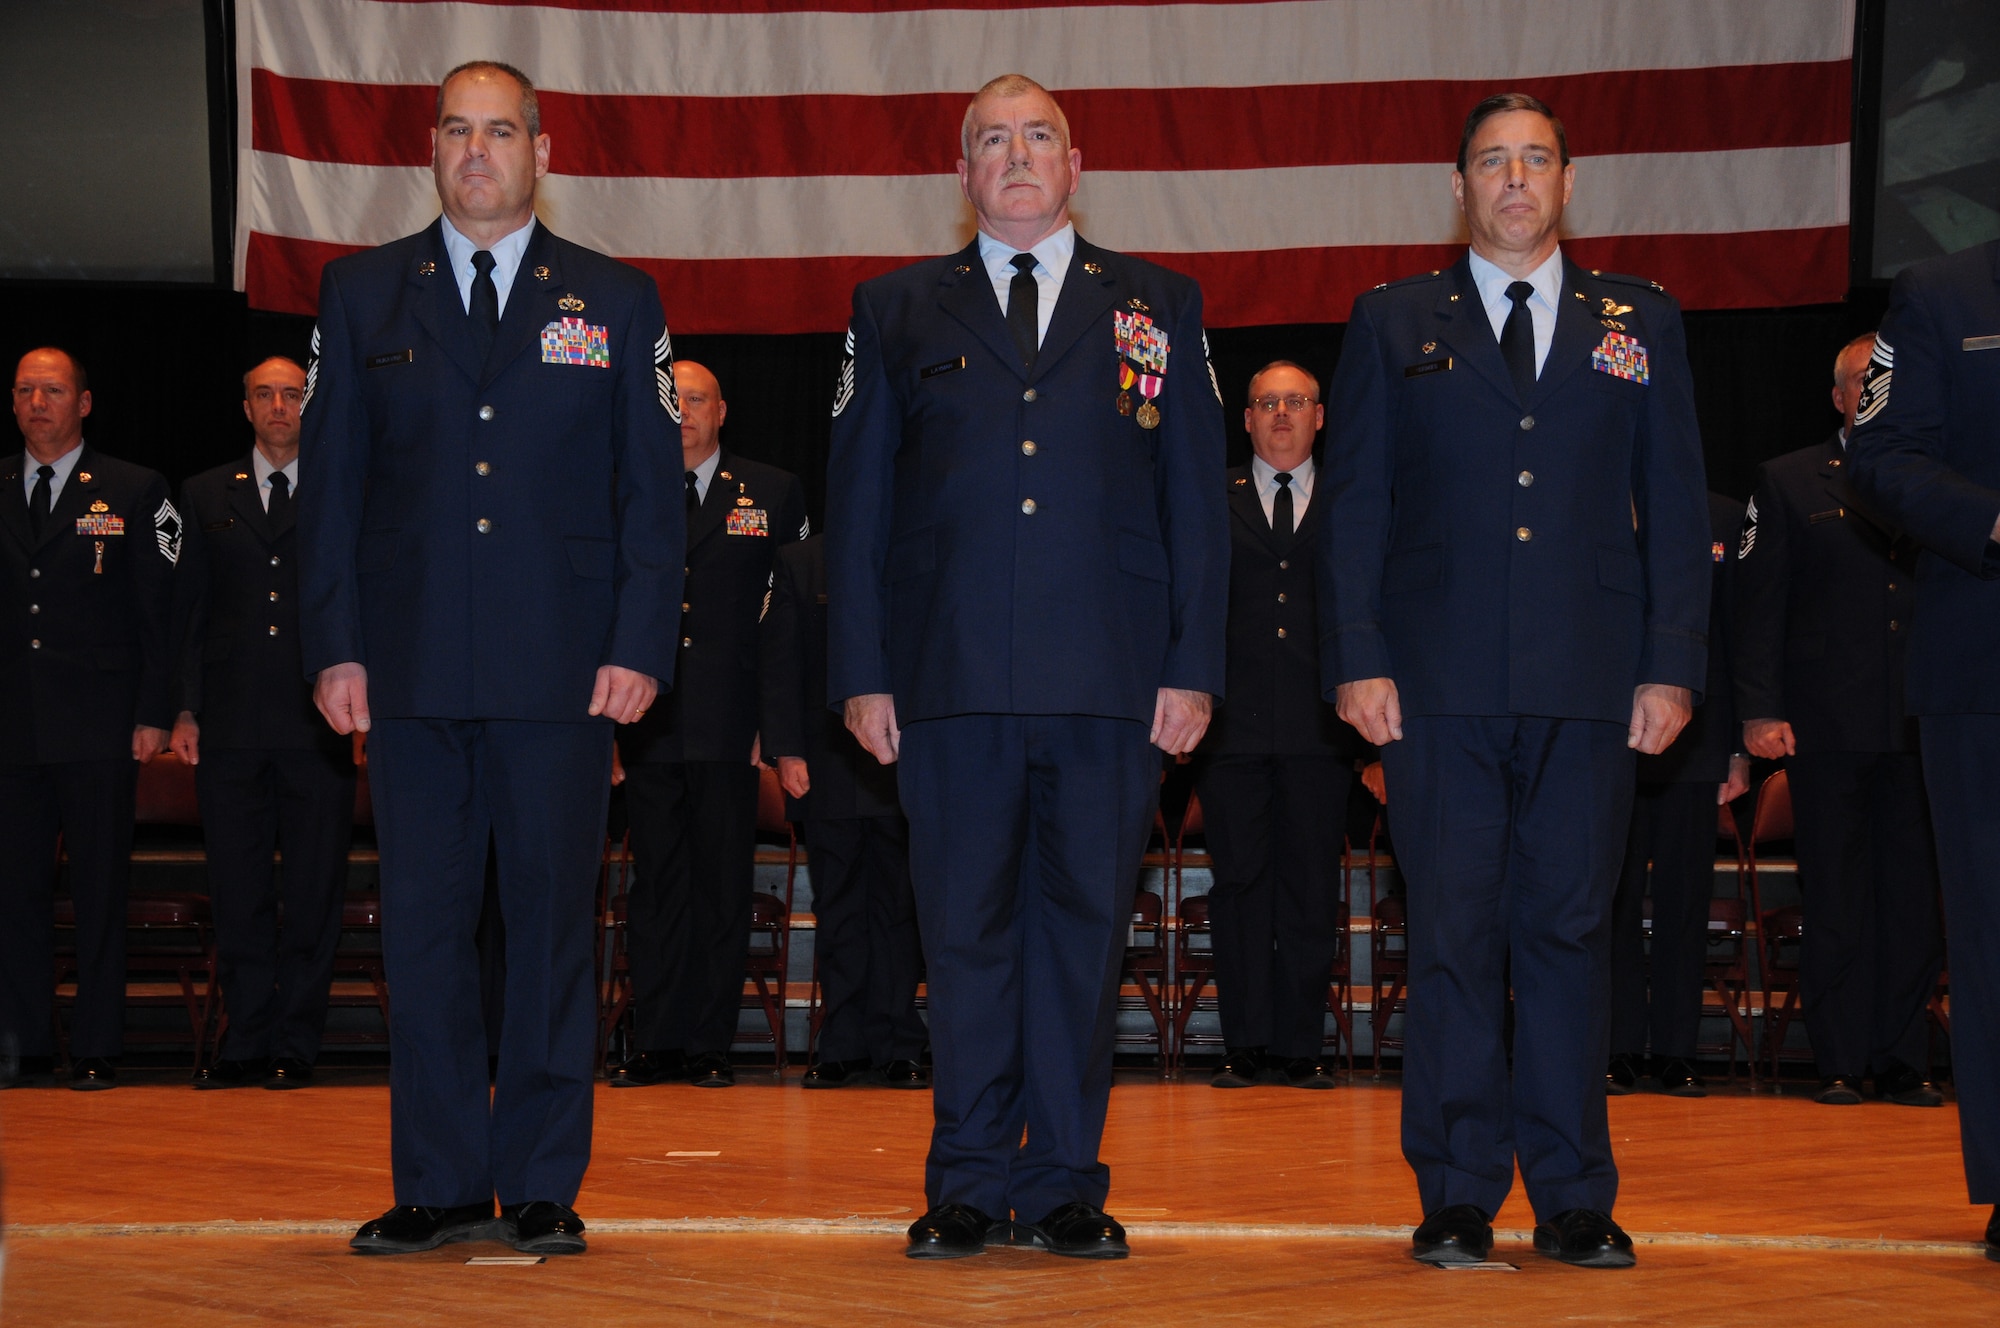 148th Fighter Wing Command Chief Master Sgt. Mark Rukavina, Command Chief Master Sgt.  Michael Layman, and 148th Fighter Wing Commander Col. Frank Stokes stand during the transfer of authority ceremony held Dec. 4, 2011 in Duluth, Minn.  The command chief is the representative of all the enlisted personnel at the 148th, and is the liasion between the commander and the enlisted Airmen. (National Guard photo by Tech. Sgt. Brett Ewald)